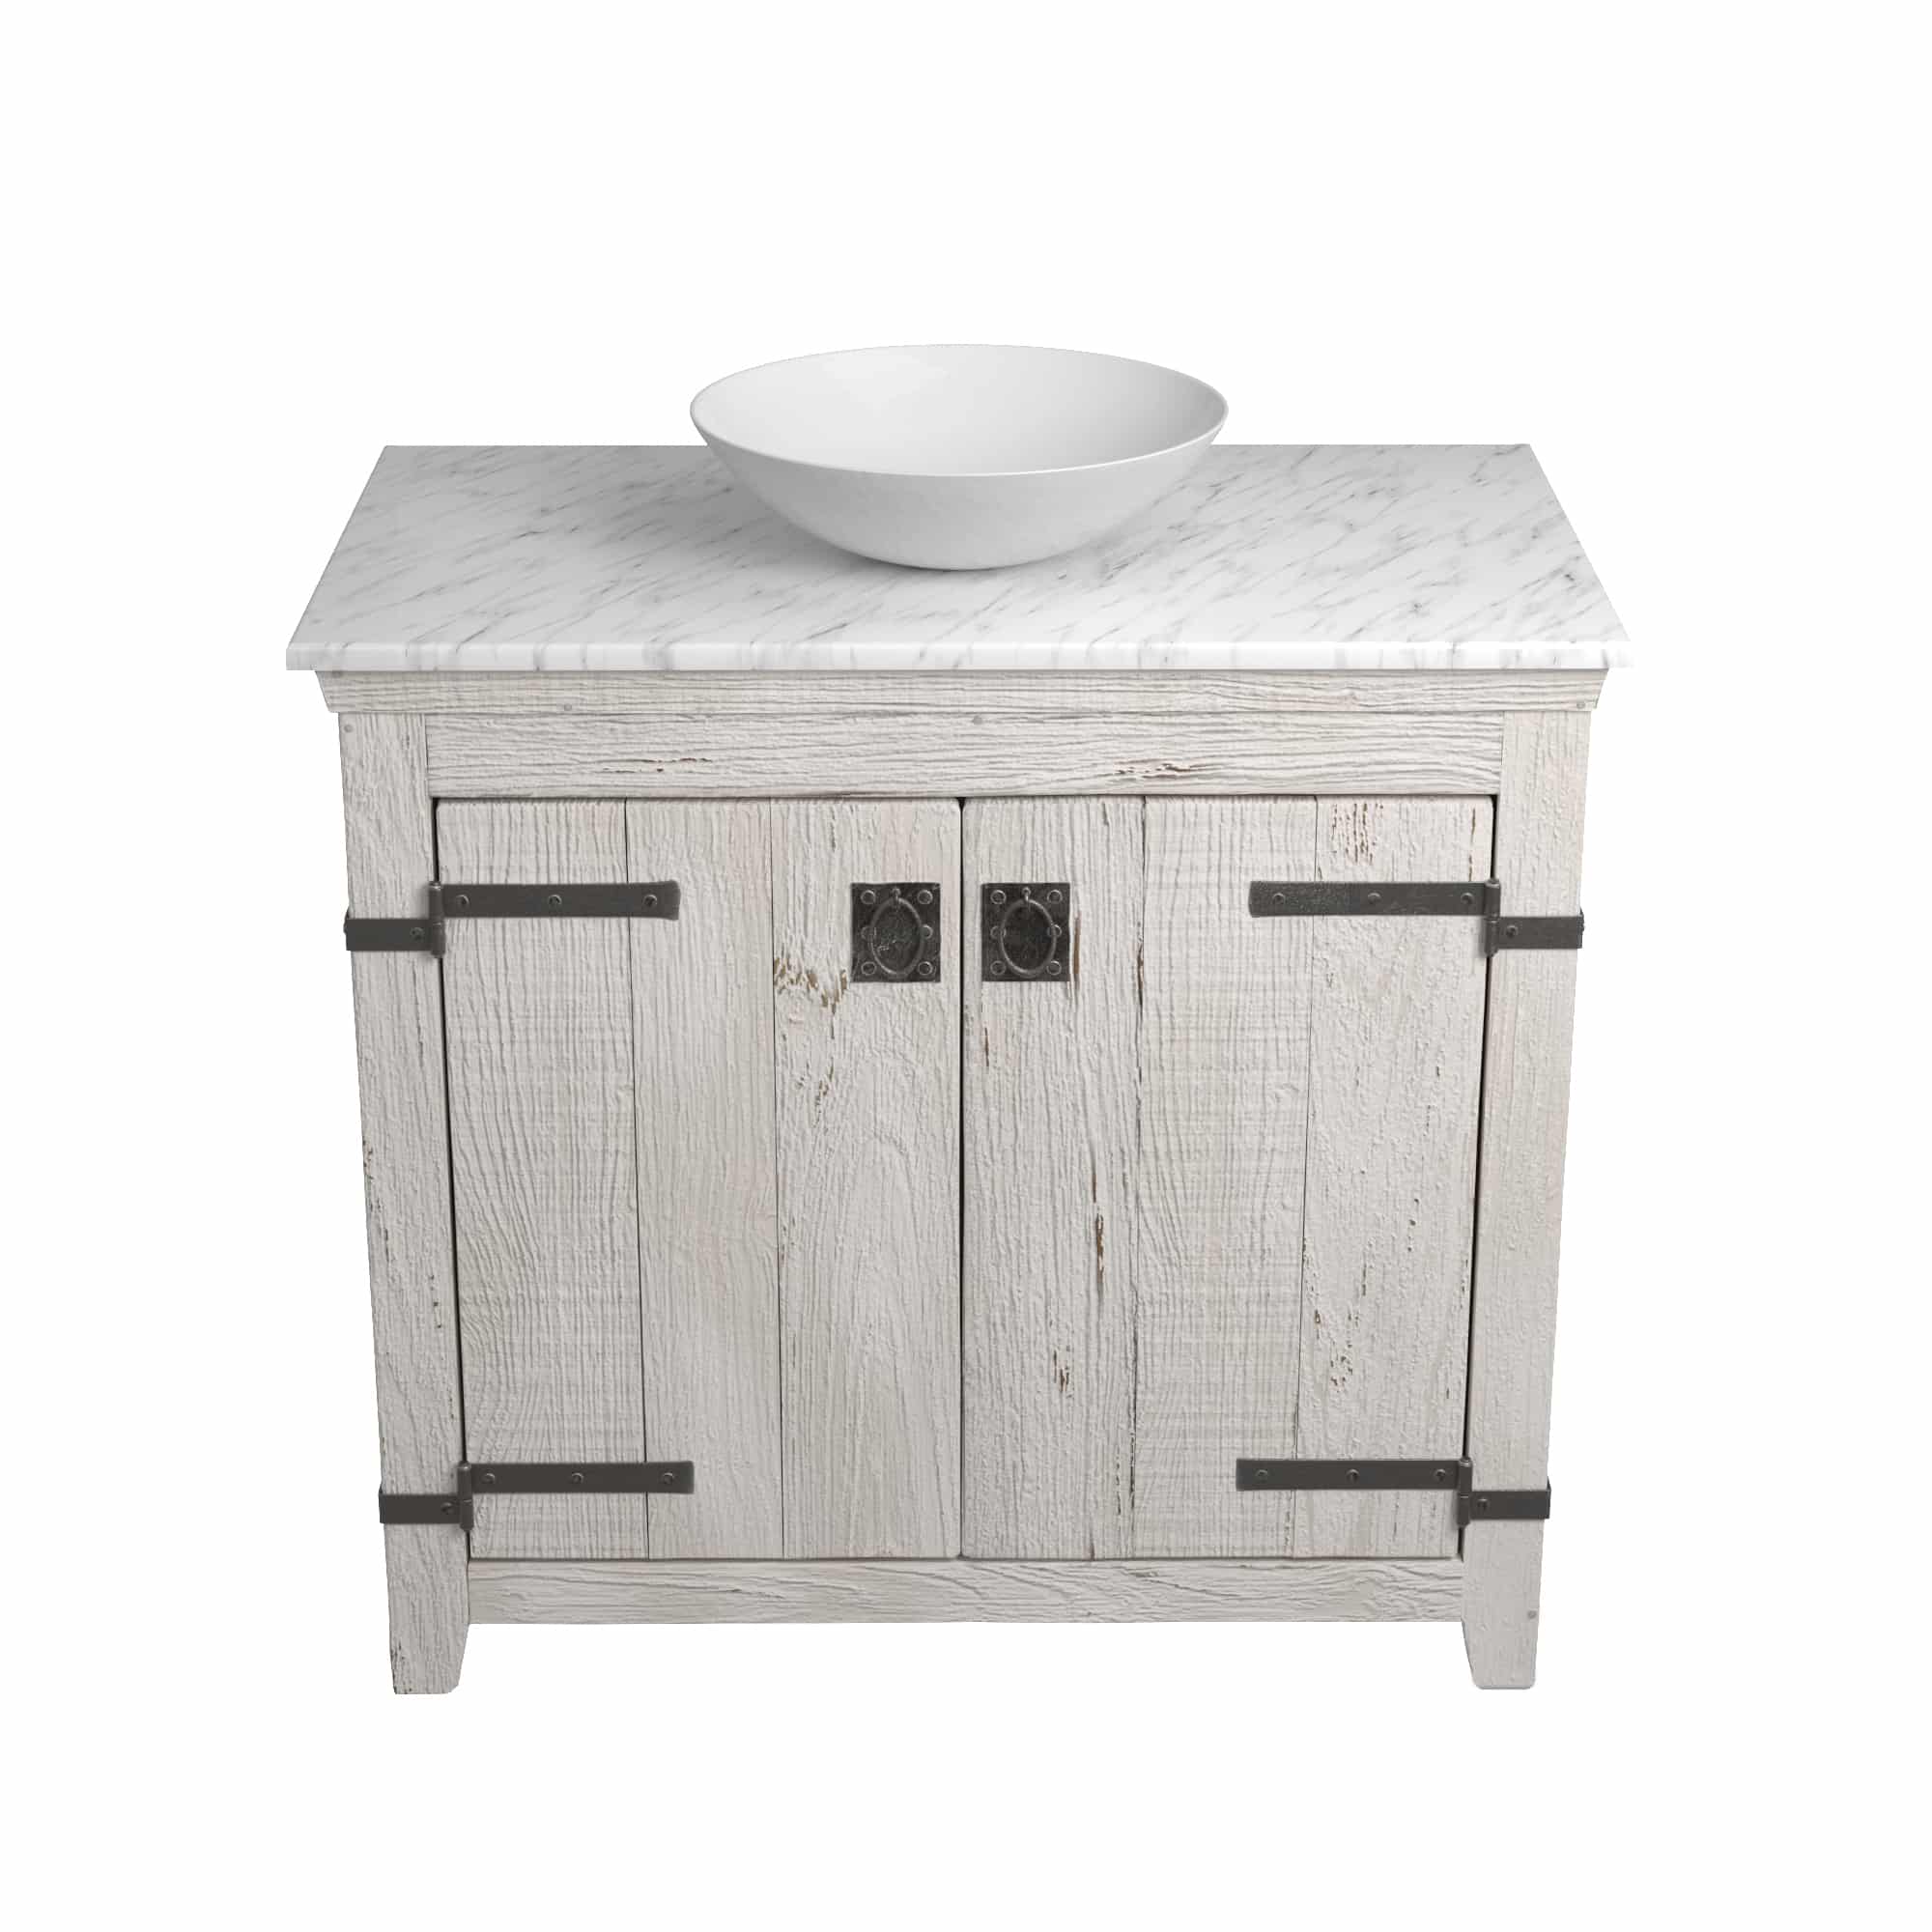 Native Trails 36" Americana Vanity in Whitewash with Carrara Marble Top and Verona in Bianco, No Faucet Hole, BND36-VB-CT-MG-074